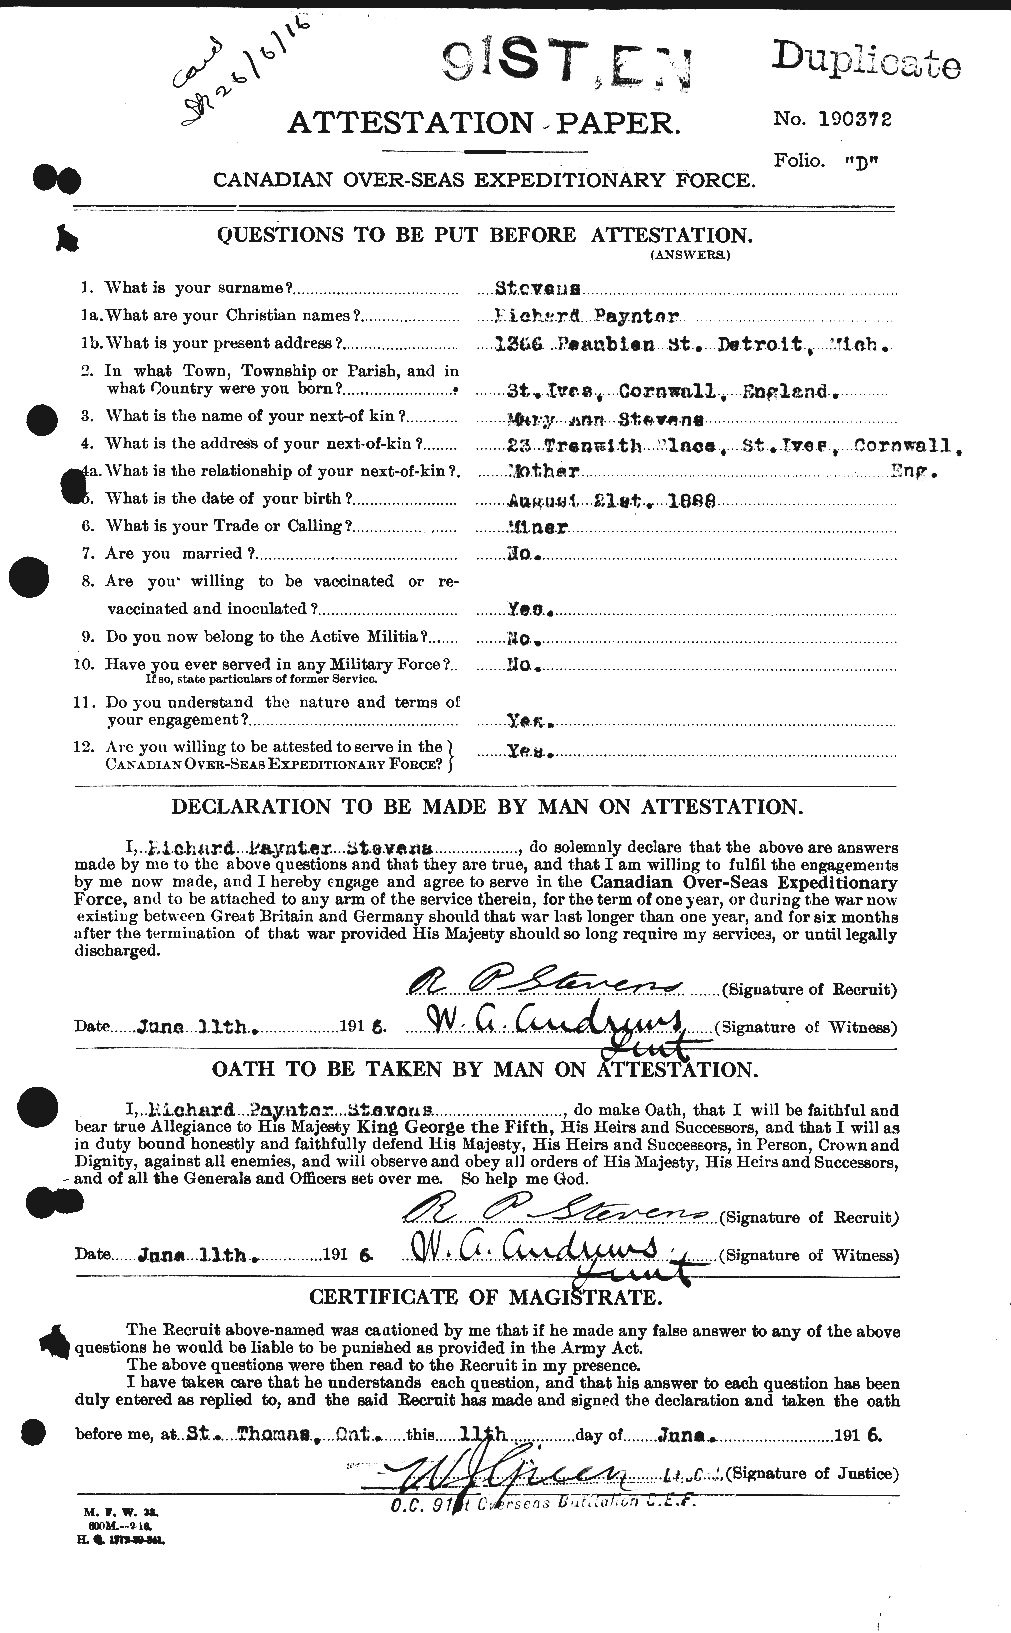 Personnel Records of the First World War - CEF 118305a